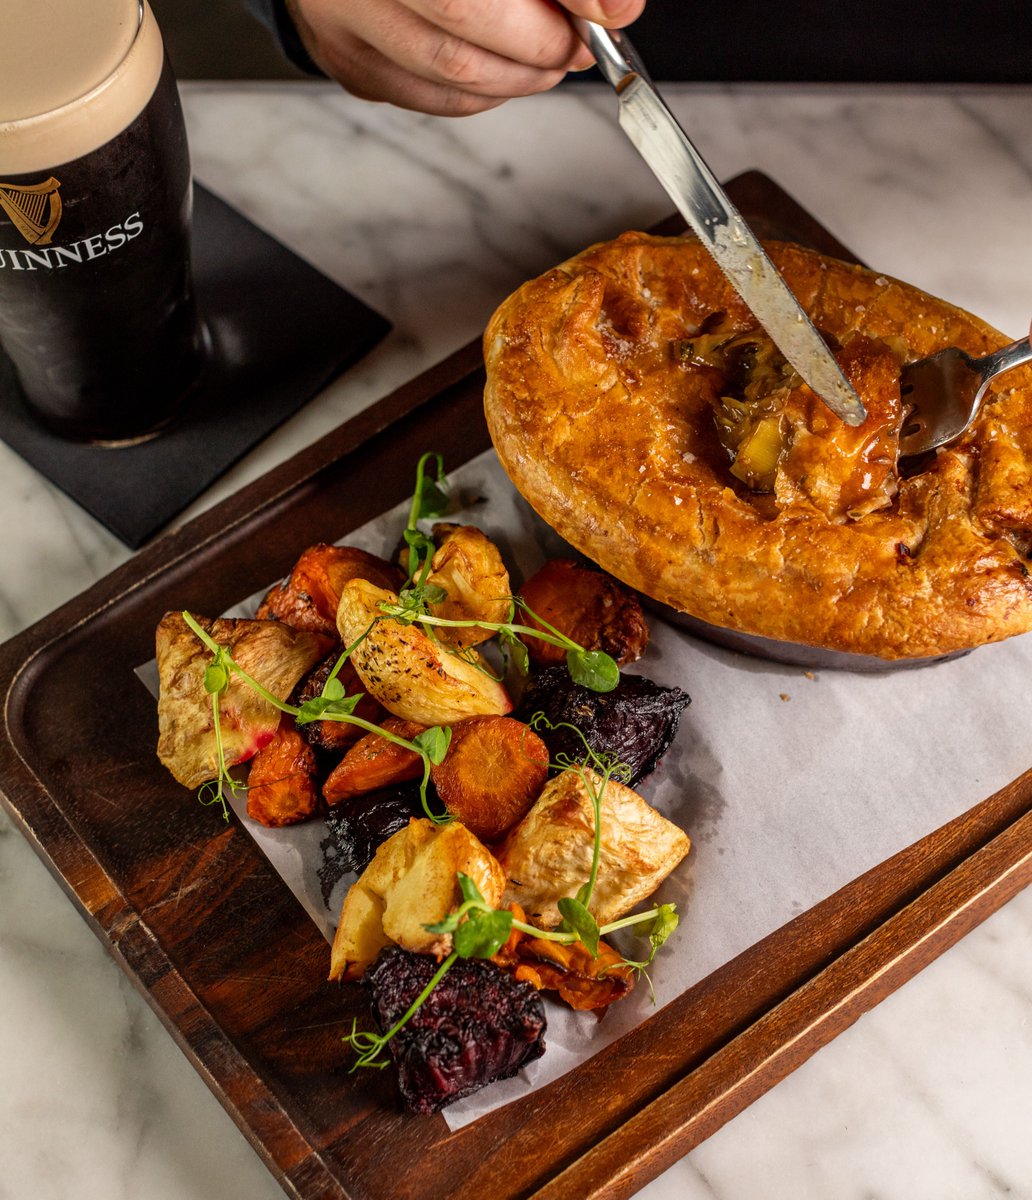 This colder weather calls for comfort foods🥧 This is our Beef, Leek & Guinness Pot Pie 🤤 Contact hello@thebridge1859.ie for bookings, walk-ins also welcome! #thebridge1859 #newmenu